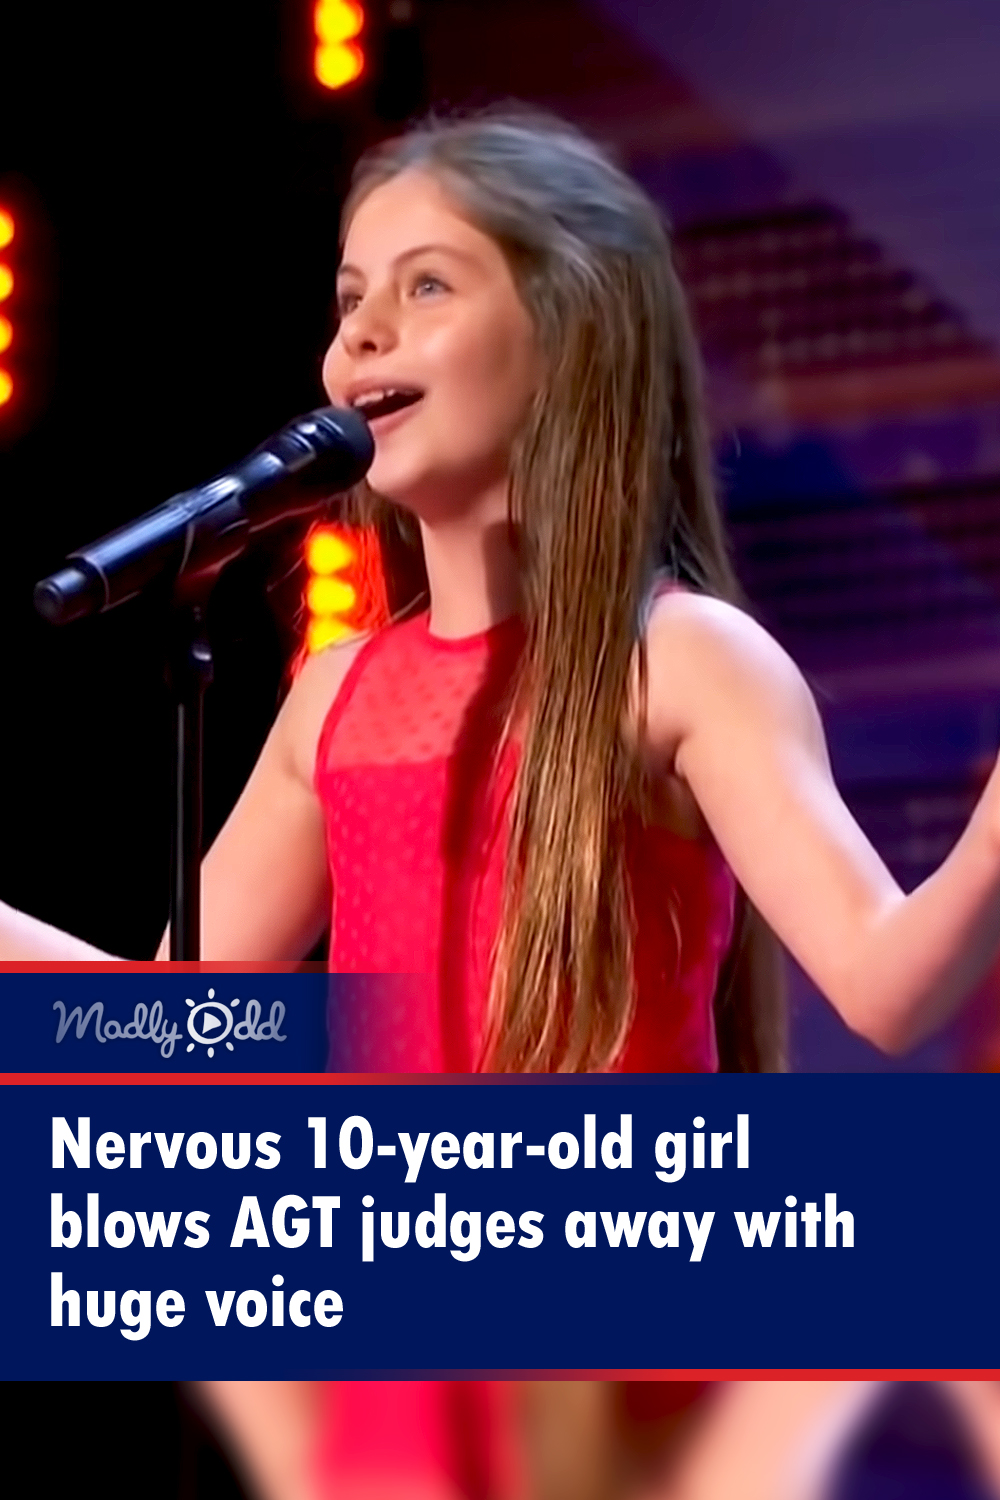 Nervous 10-year-old girl blows AGT judges away with huge voice